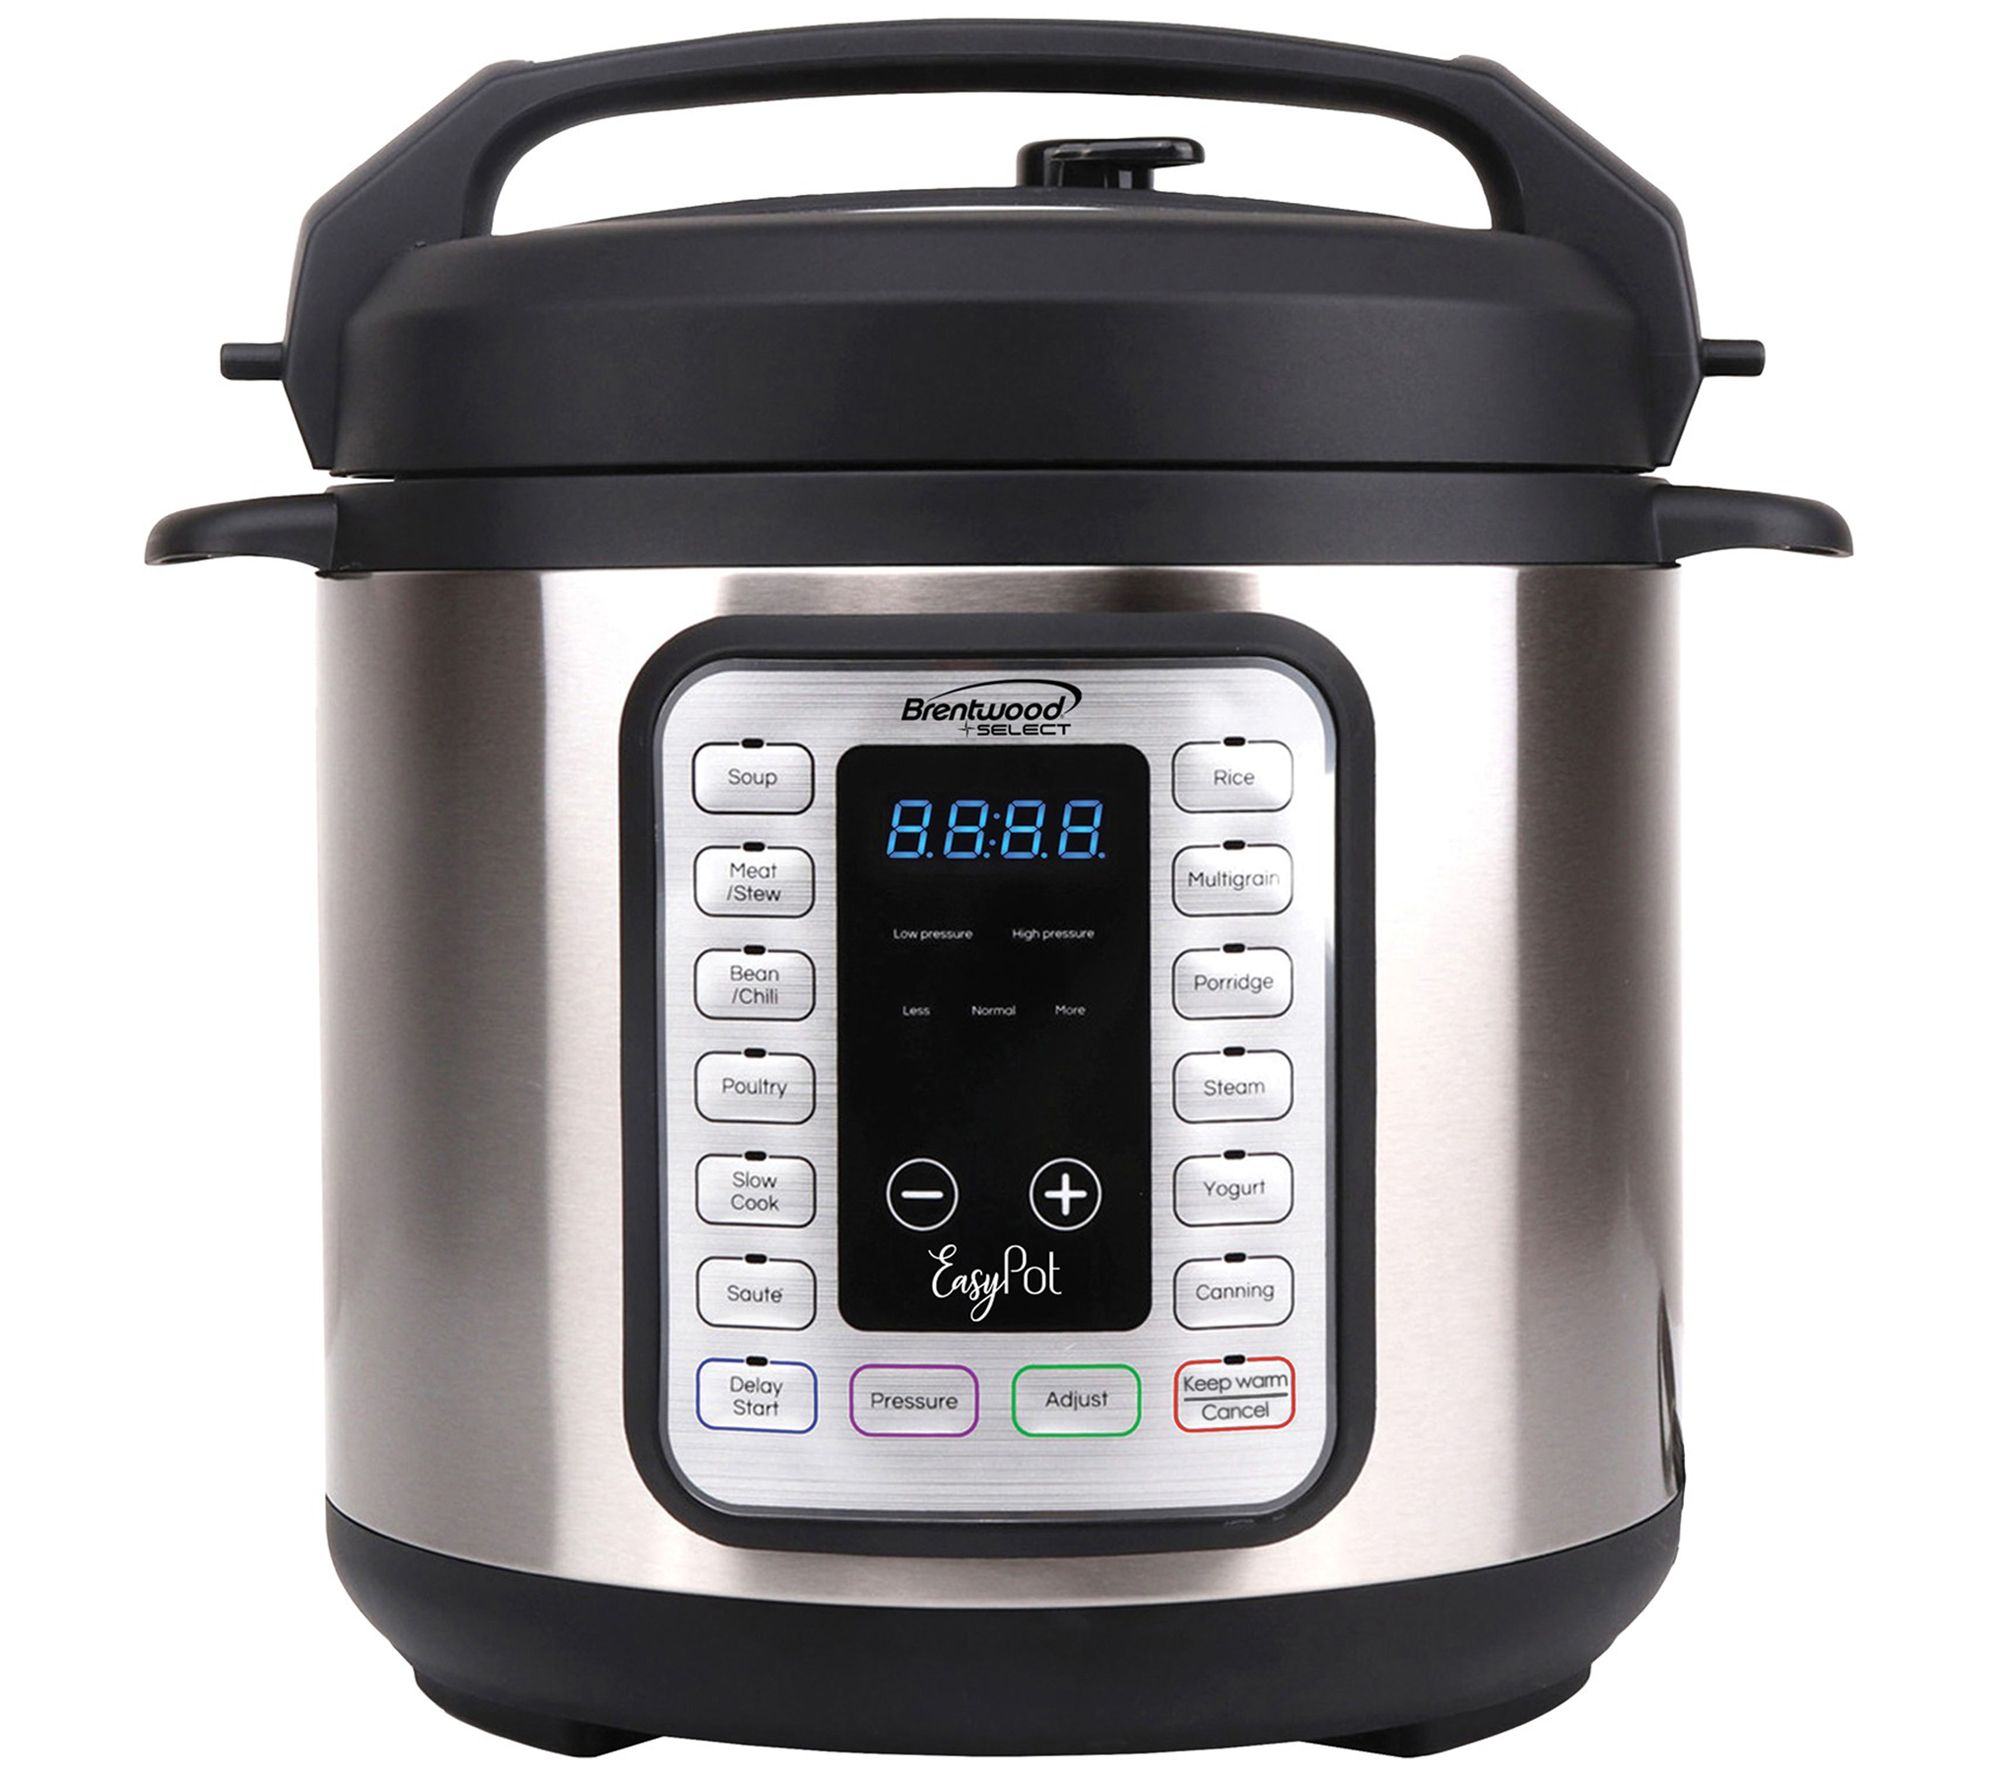 Brentwood 3.5 Quart Diamond Pattern Electric Slow Cooker